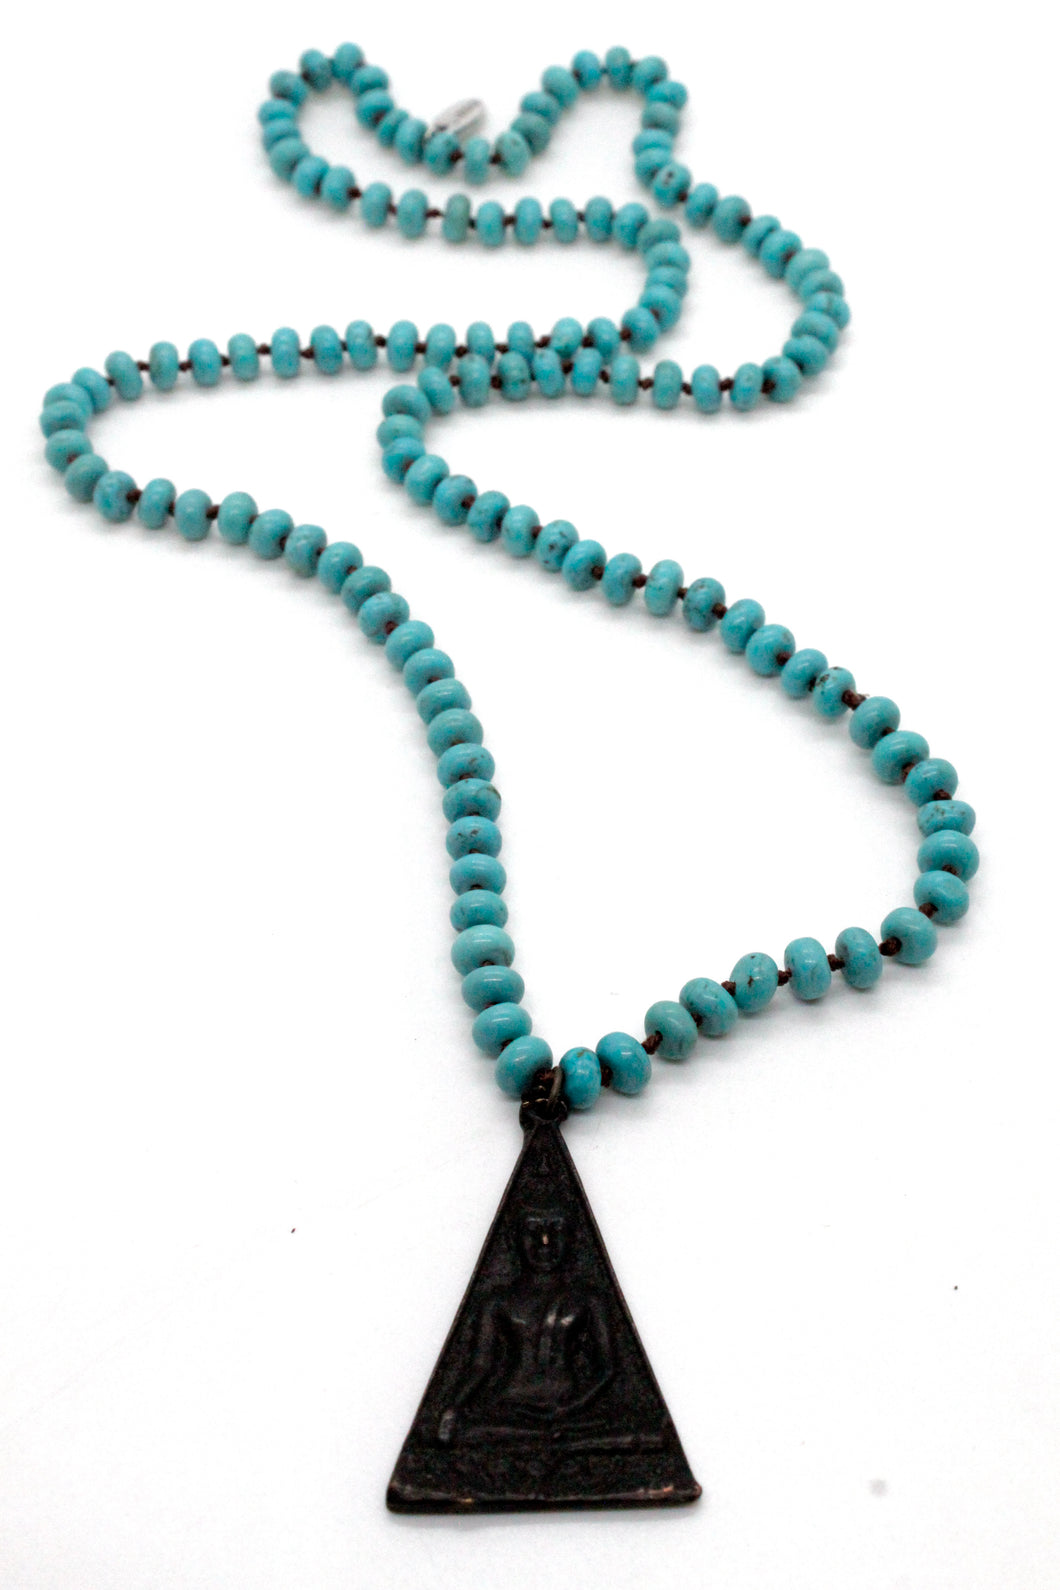 Beautiful Hand Knotted Turquoise Necklace with Black Reversible Buddha Charm NL-TQ-BkTB -The Buddha Collection-